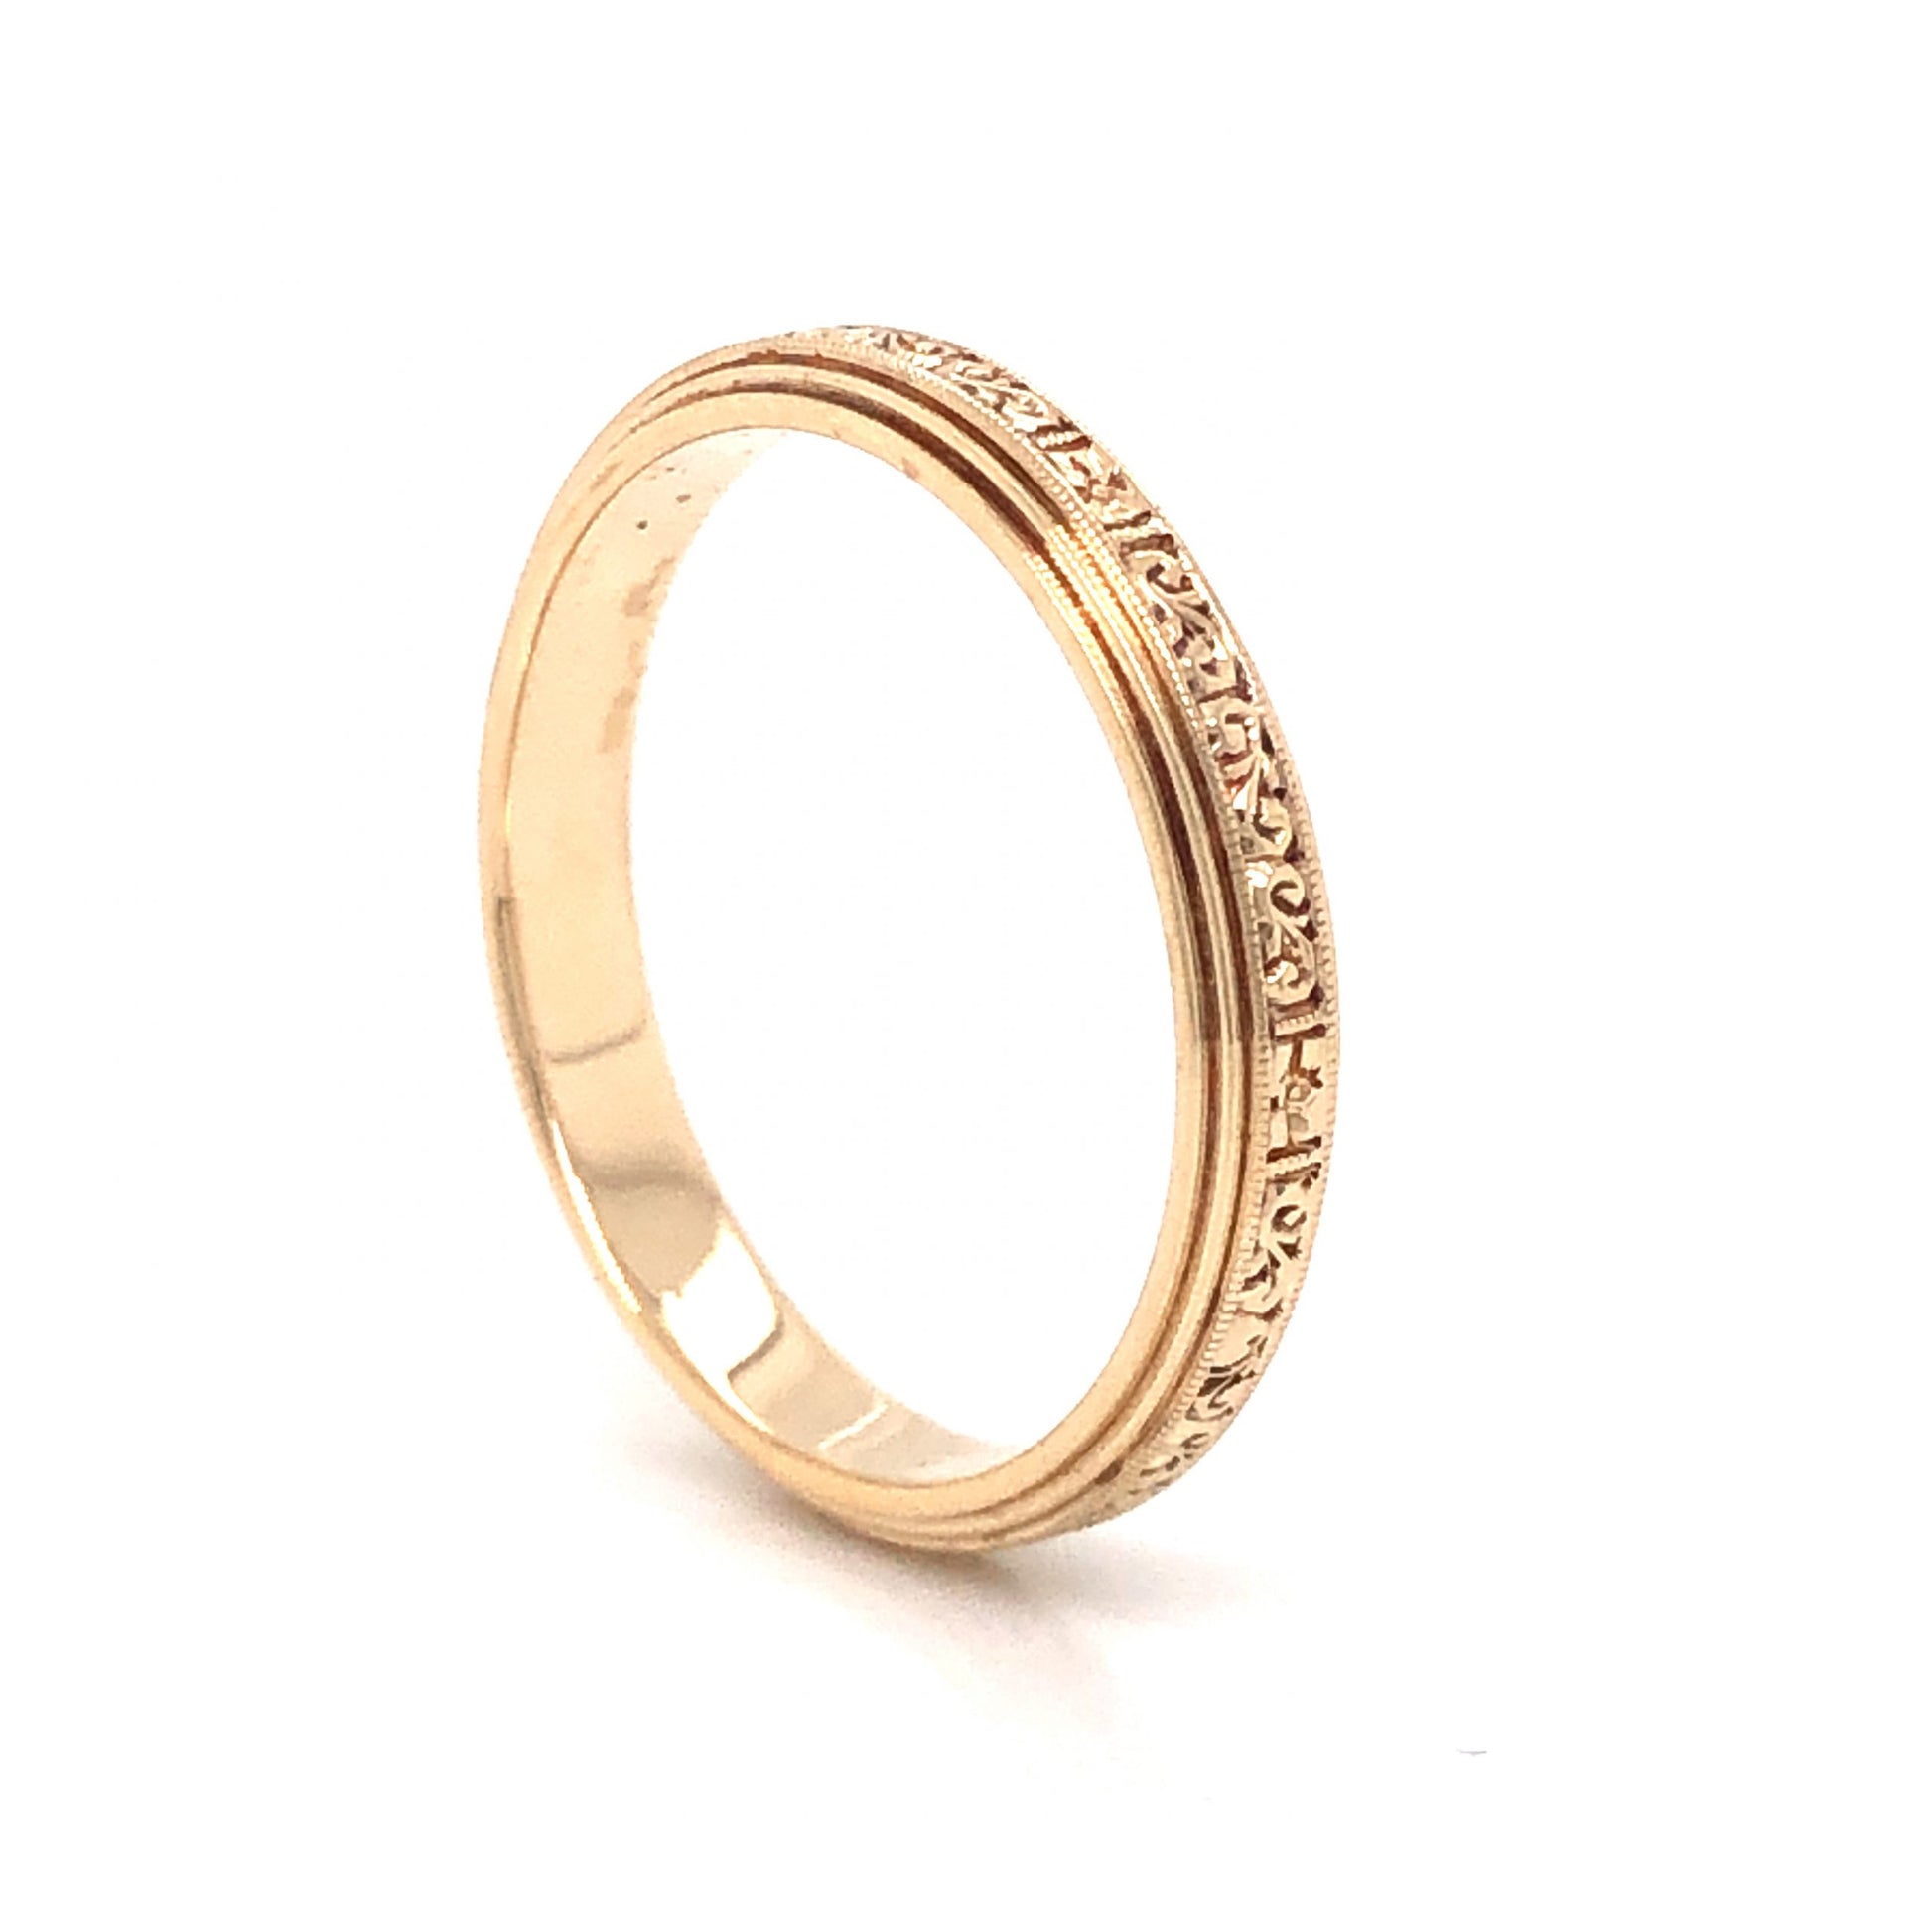 Art Deco Filigree Engraved Wedding Band in 14k Yellow Gold